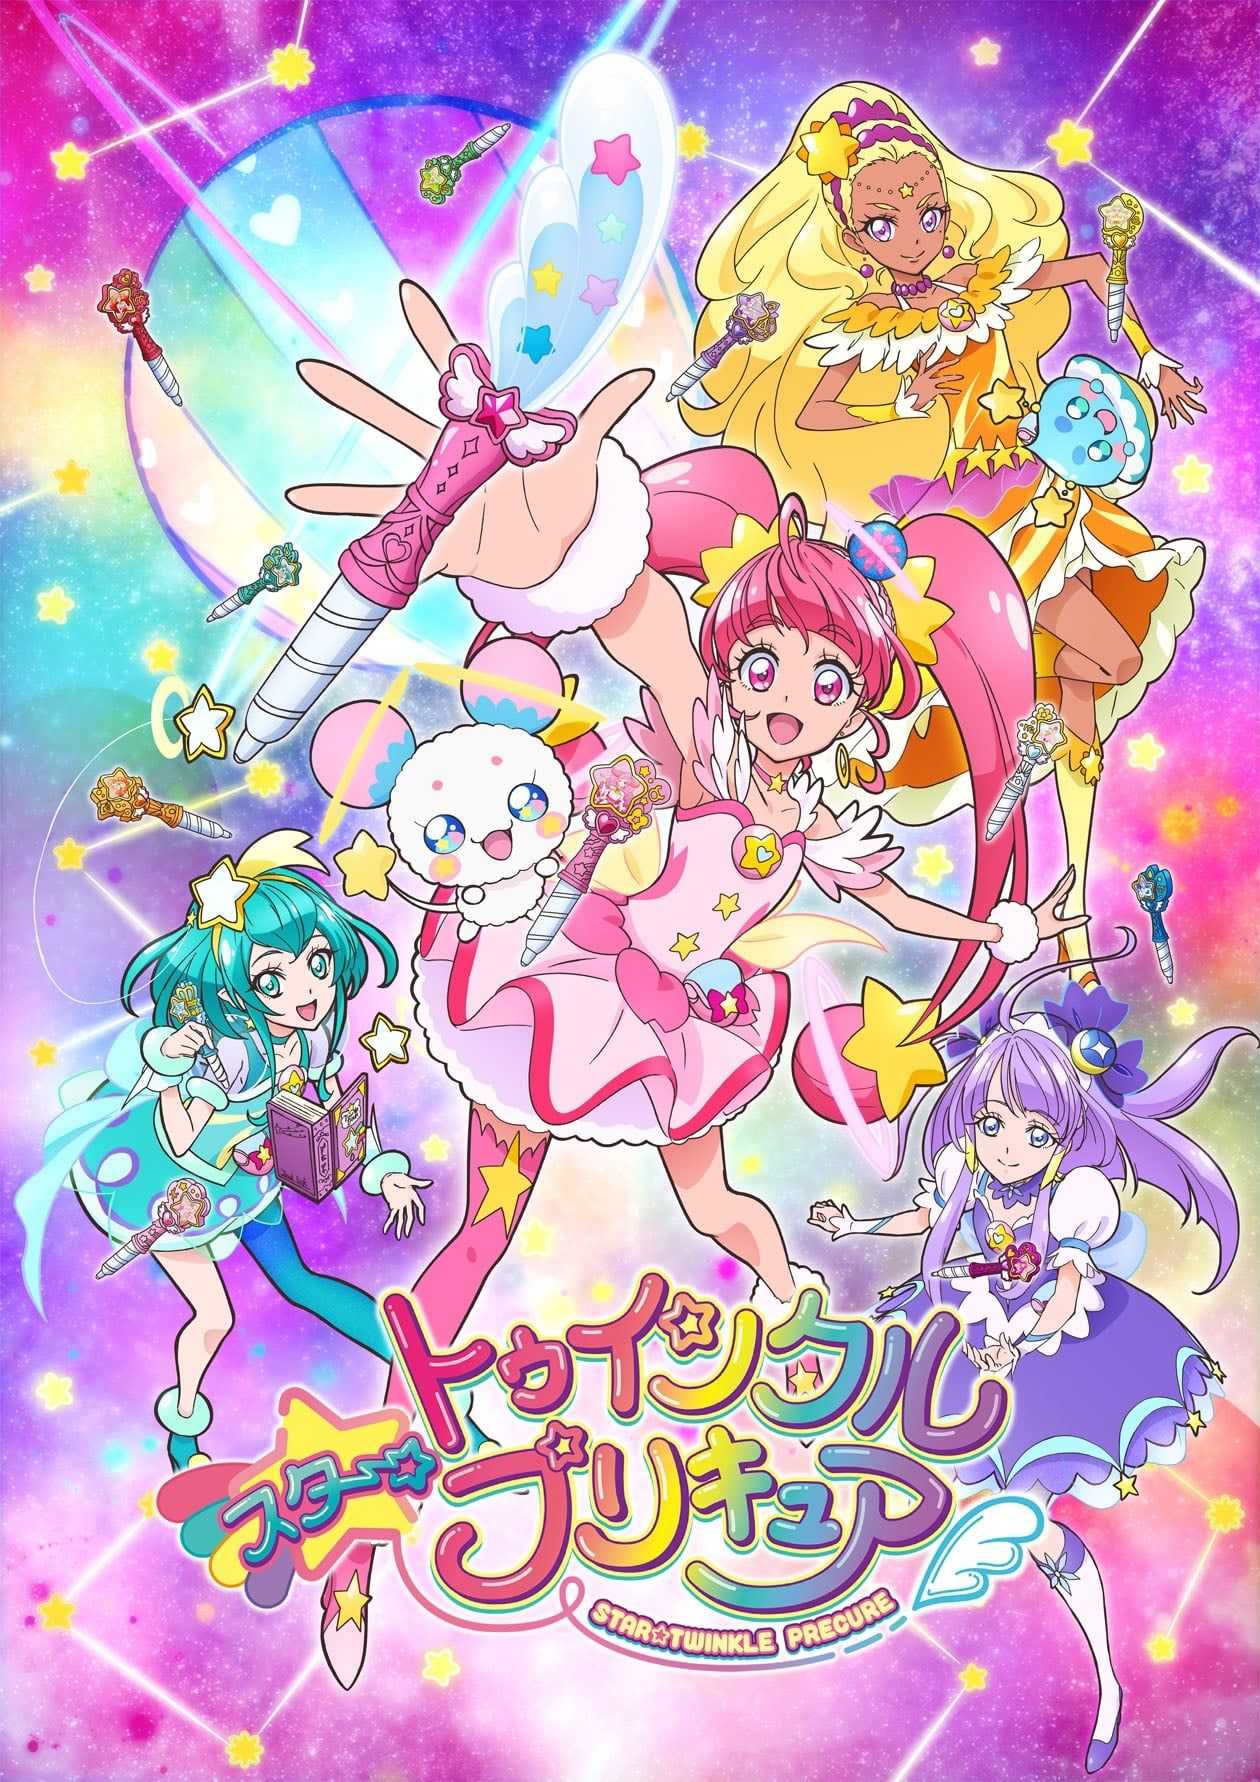 [Updated This Year] Star☆Twinkle Precure (TV) (Sub)